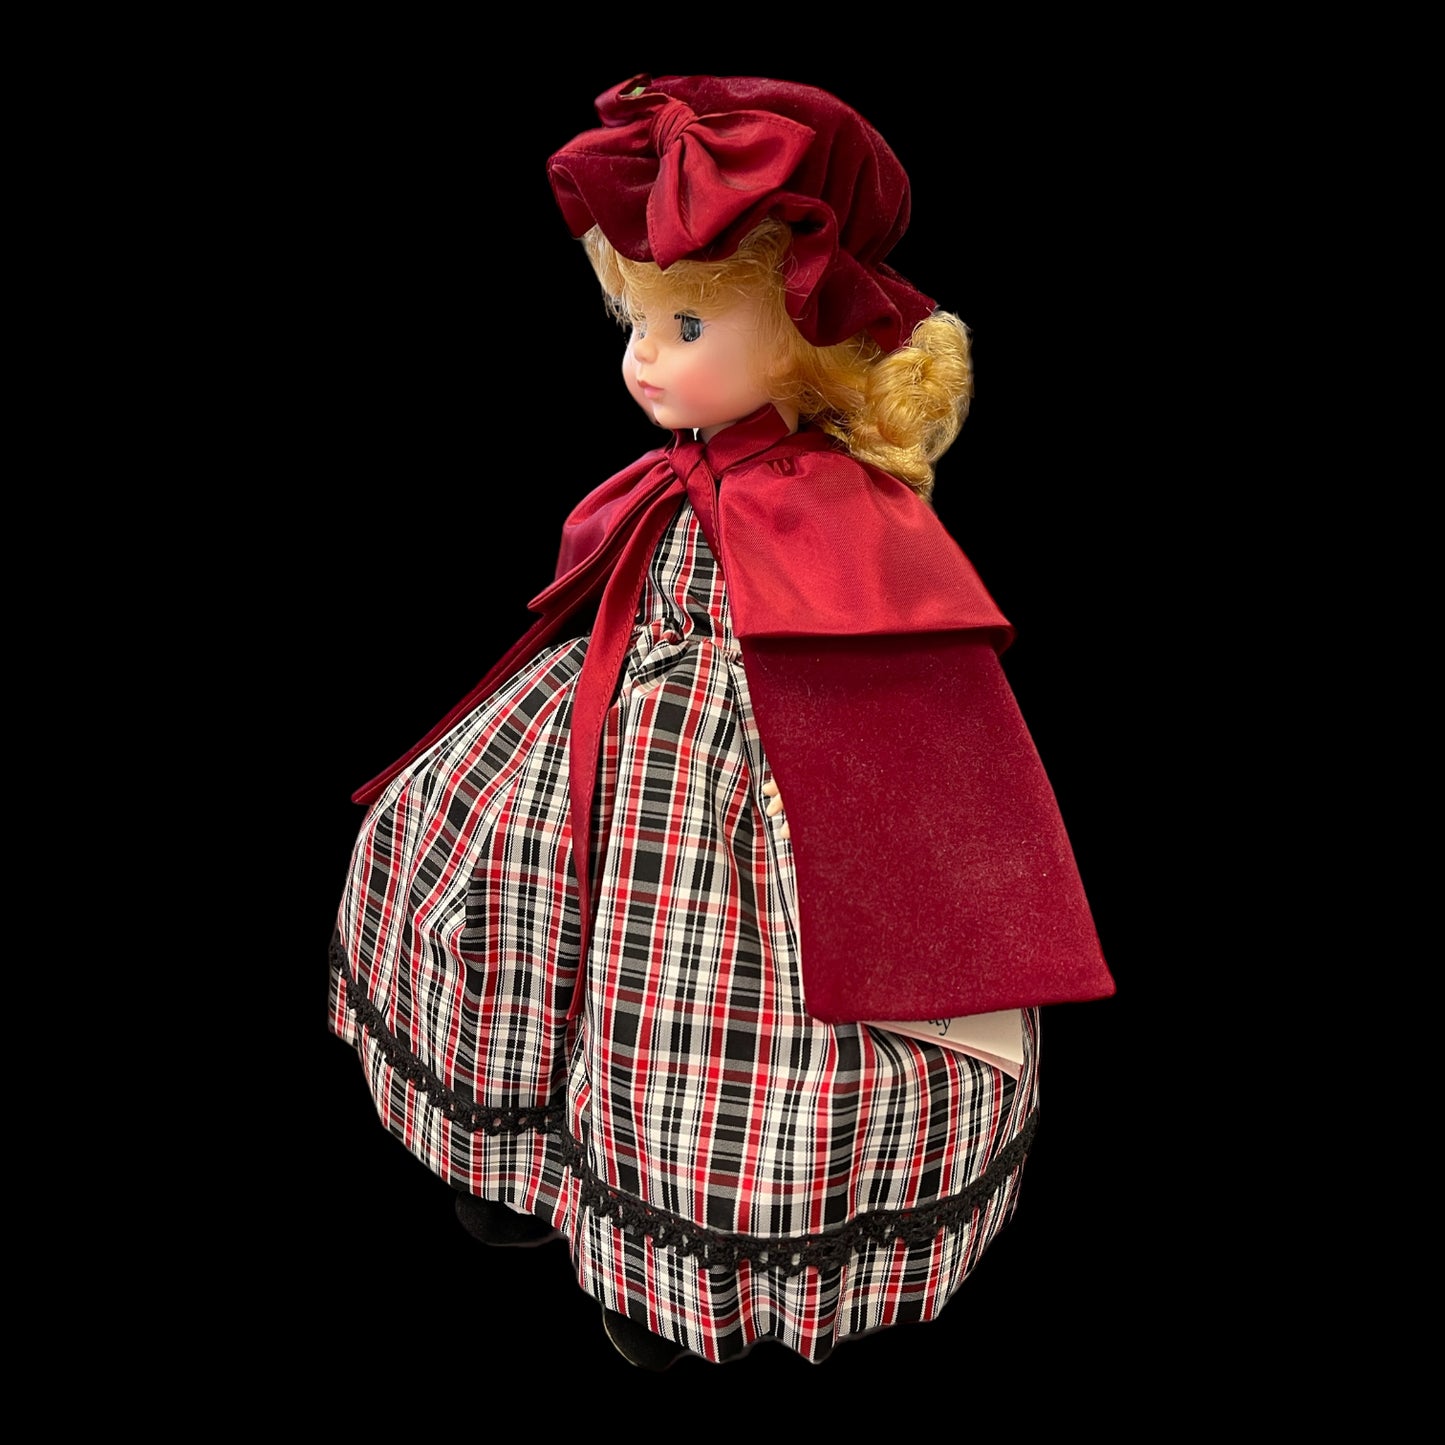 Madame Alexander Doll Molly Number 1561